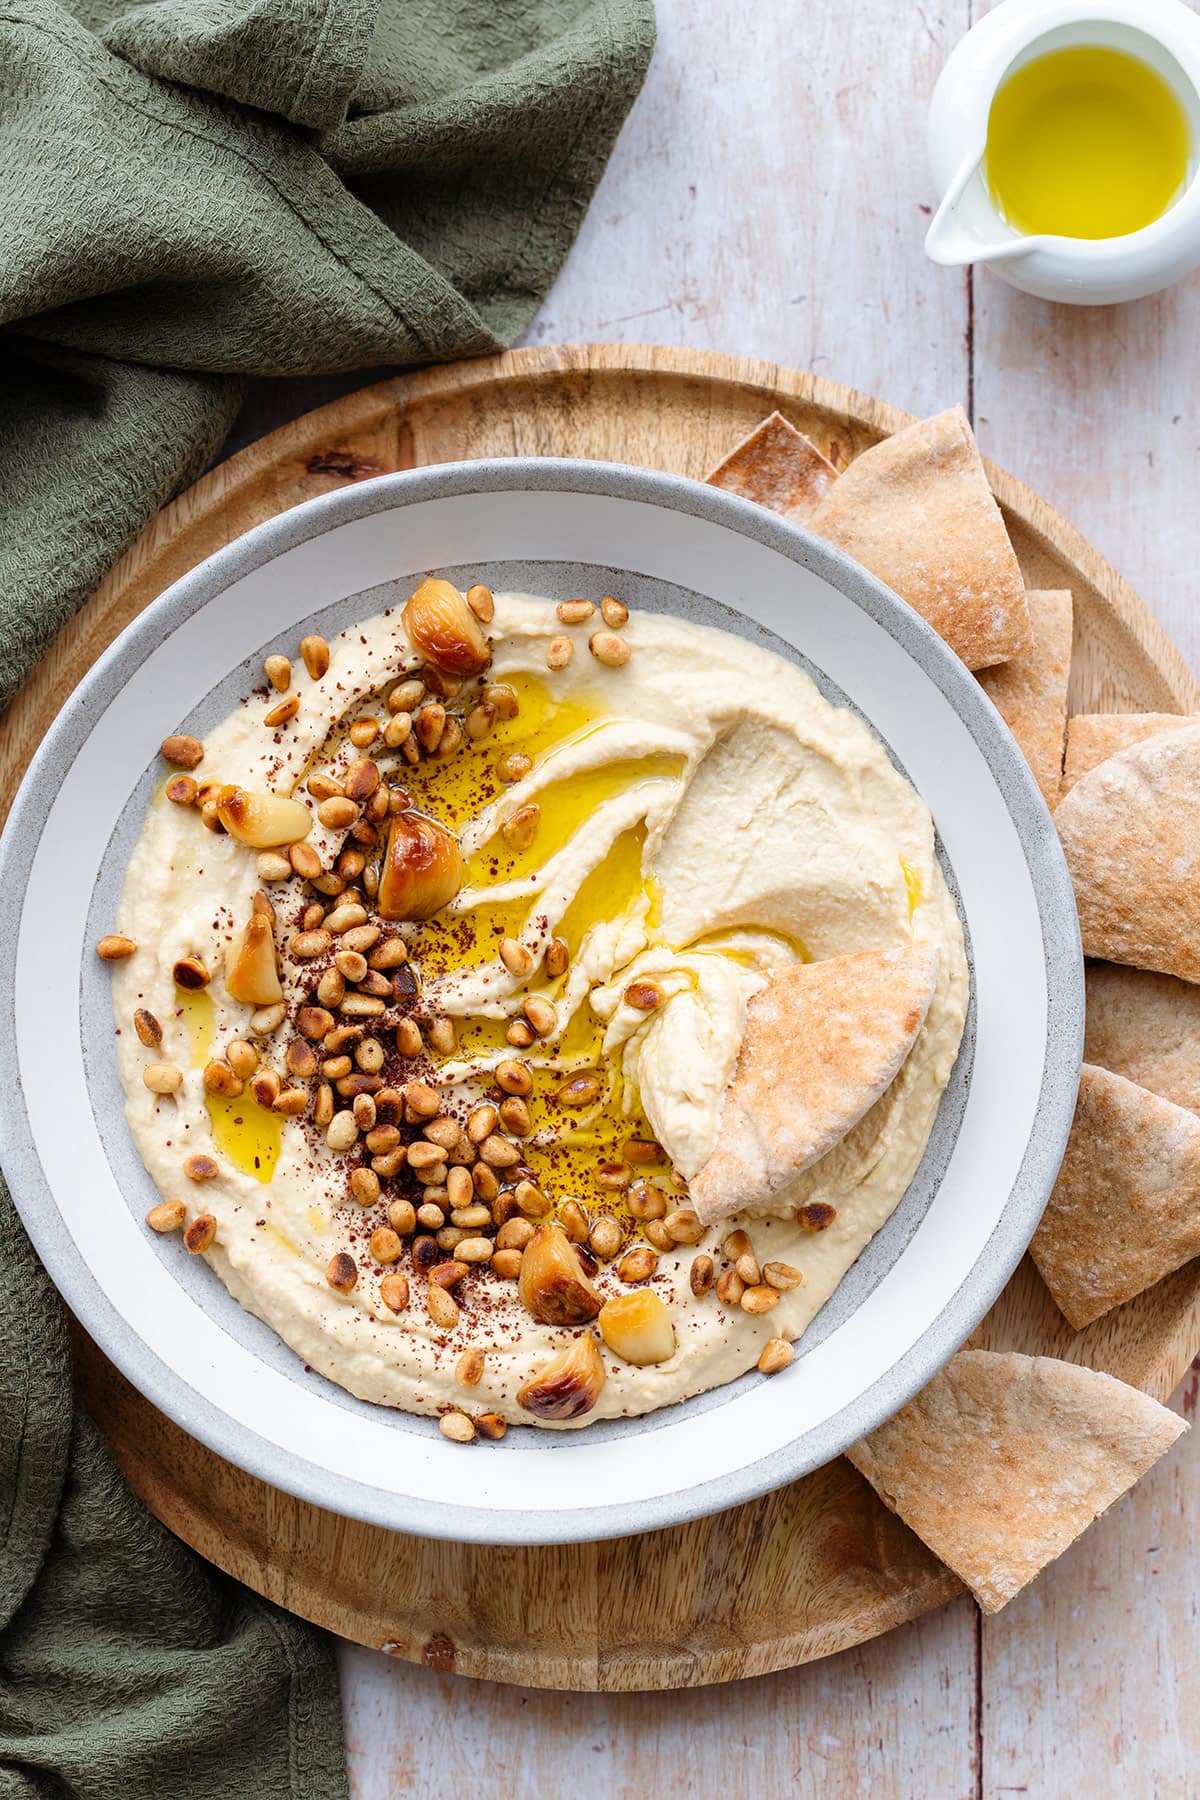 Hummus in a shallow grey bowl topped with pine nuts, roasted garlic, and olive oil with a pita dipped in.